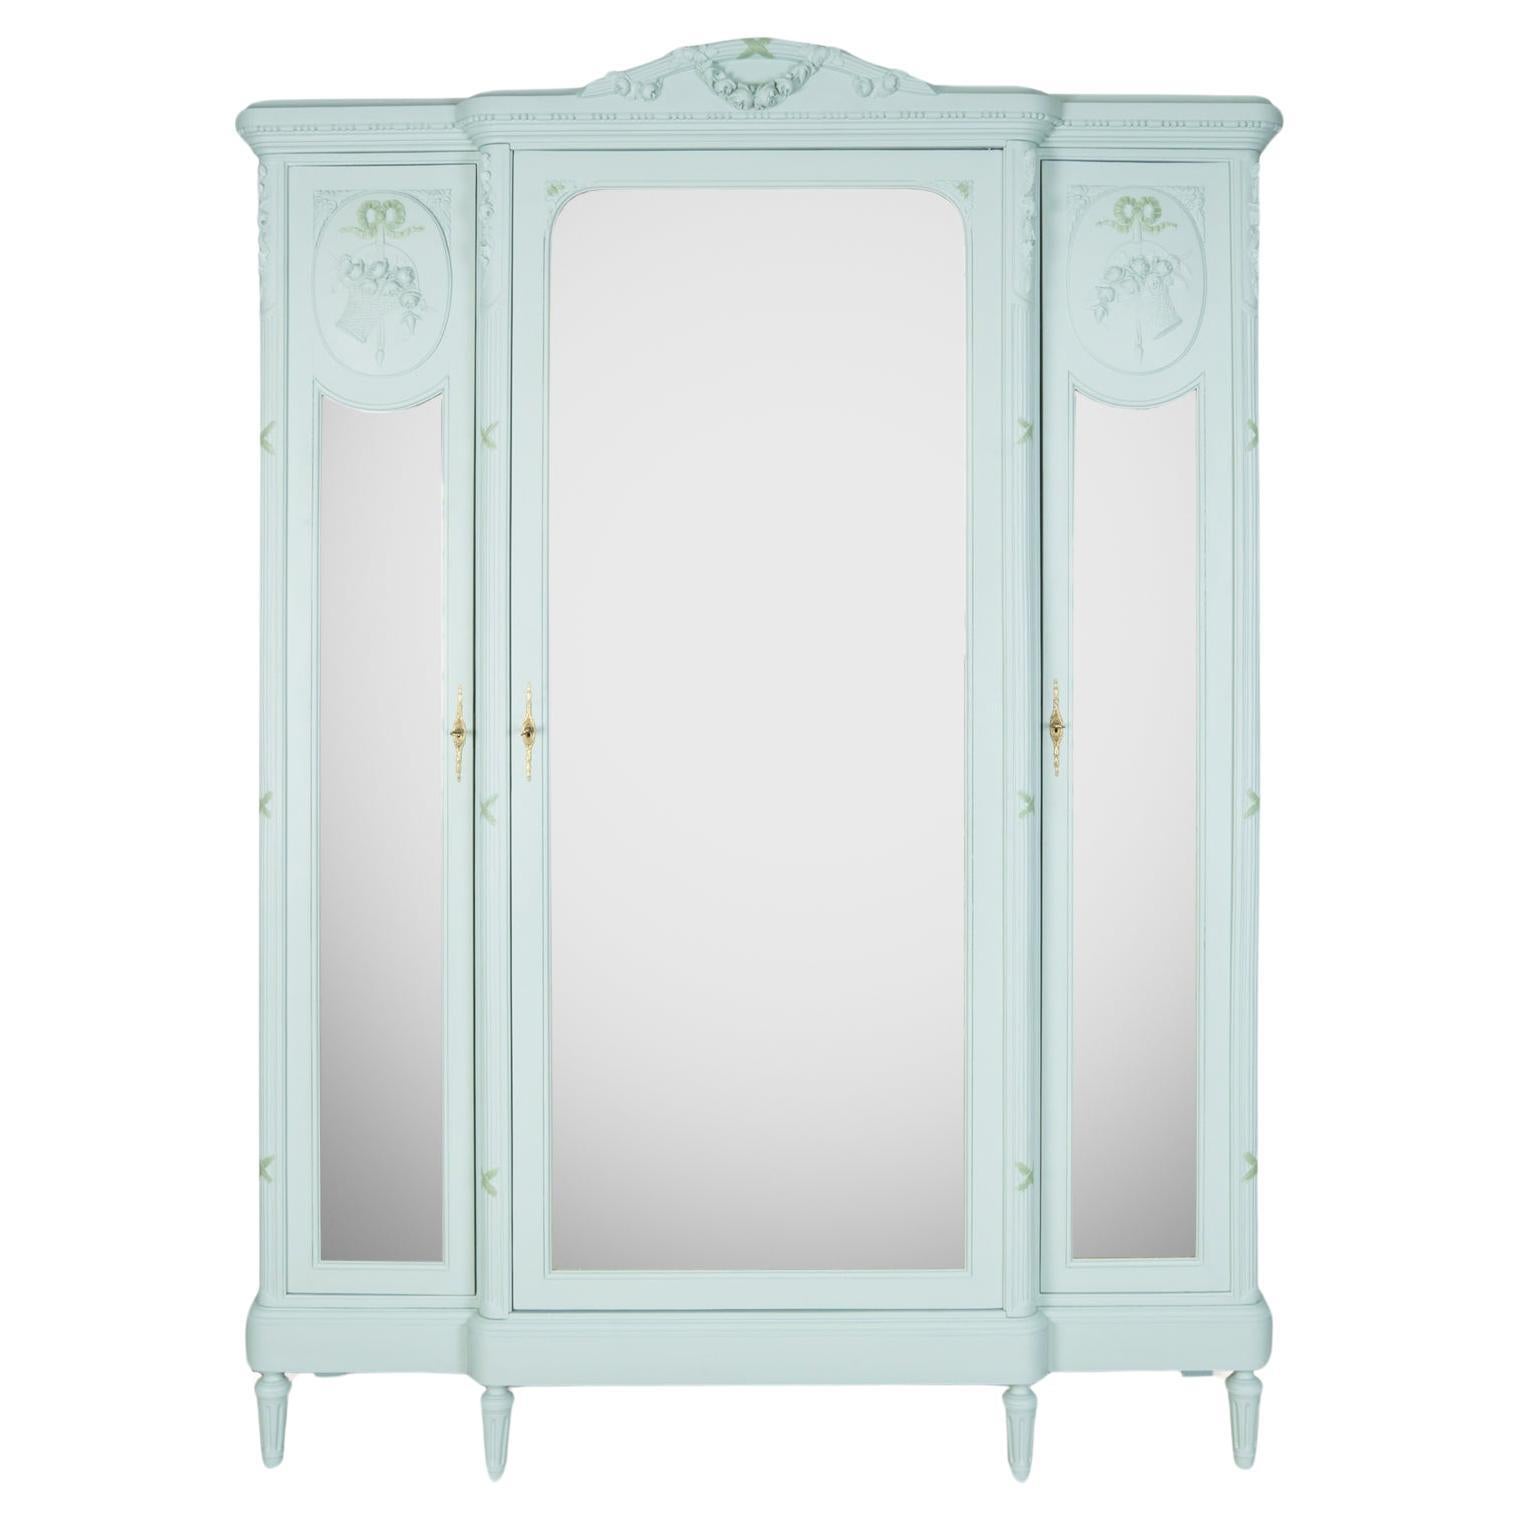 Antique French Louis XVI Style Painted Triple Door Mirror Armoire or Wardrobe For Sale